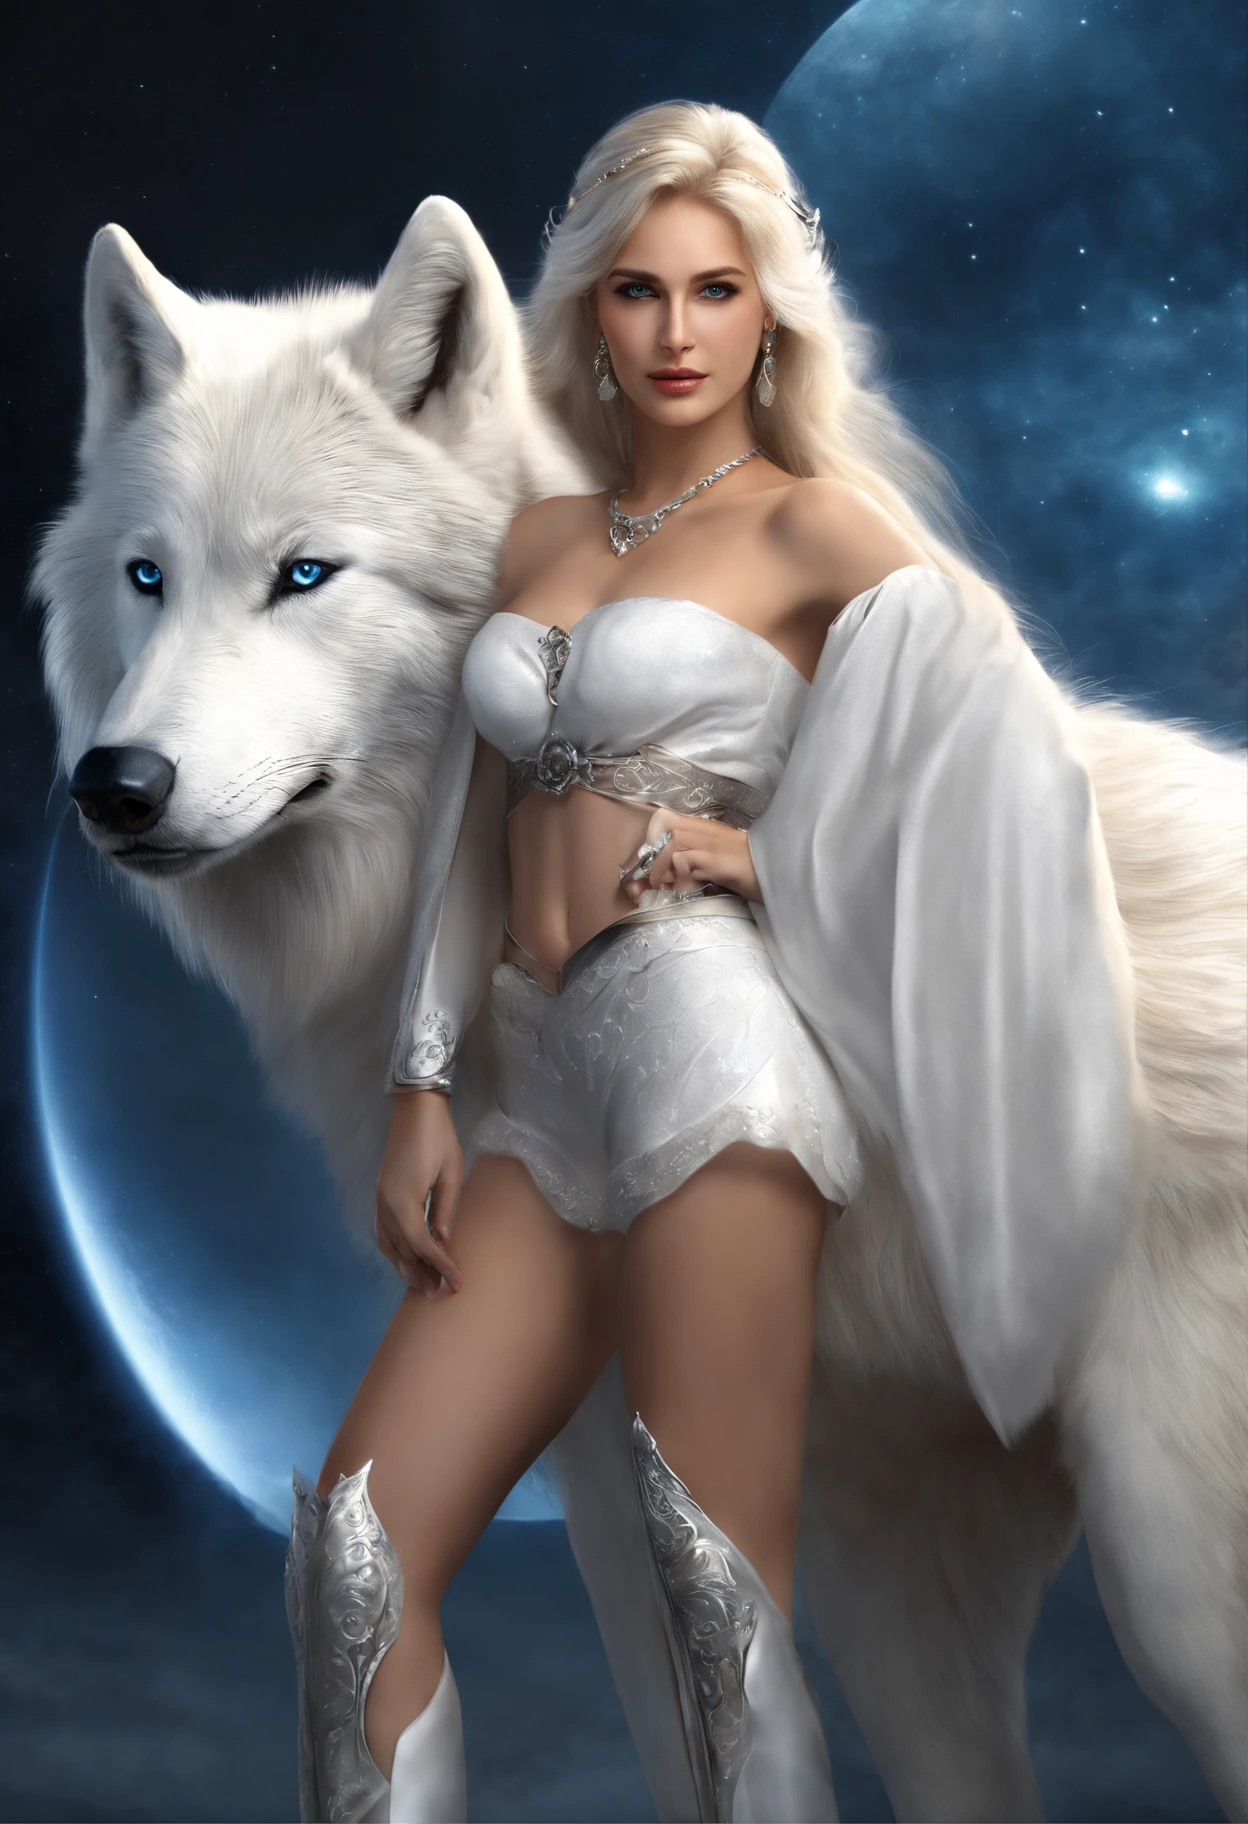 ((White wolf and girl)), (huge wolf), white wolf&#39;her fur glows with silver sparks, (a huge white wolf guards a beautiful young girl), motion, runs ahead, stooping forward, (Venus de Milo), (NSFW), a goddess, blue eyes, (A very young girl), ((Girl 16 years old)) lips ajar, blue eyes, blonde woman, Very long curly hair, transparent board, transparent air payment, Silver collar, Silver Belt, greek sandals, Silver sandals, Starry sky background, A lot of stars, background Orion Nebula, Two moons, Orion Nebula, go on star trek, The Milky Way is at your feet. full body photographed, Panoramic view, (Masterpiece: 1.5) (Photorealistic: 1.1) (Best Quality) (detail skin texture, pores, hairsh: 1.1) (Intricate) (8K) (HDR) (wallpapers) (Cinematic lighting) (sharp-focus)